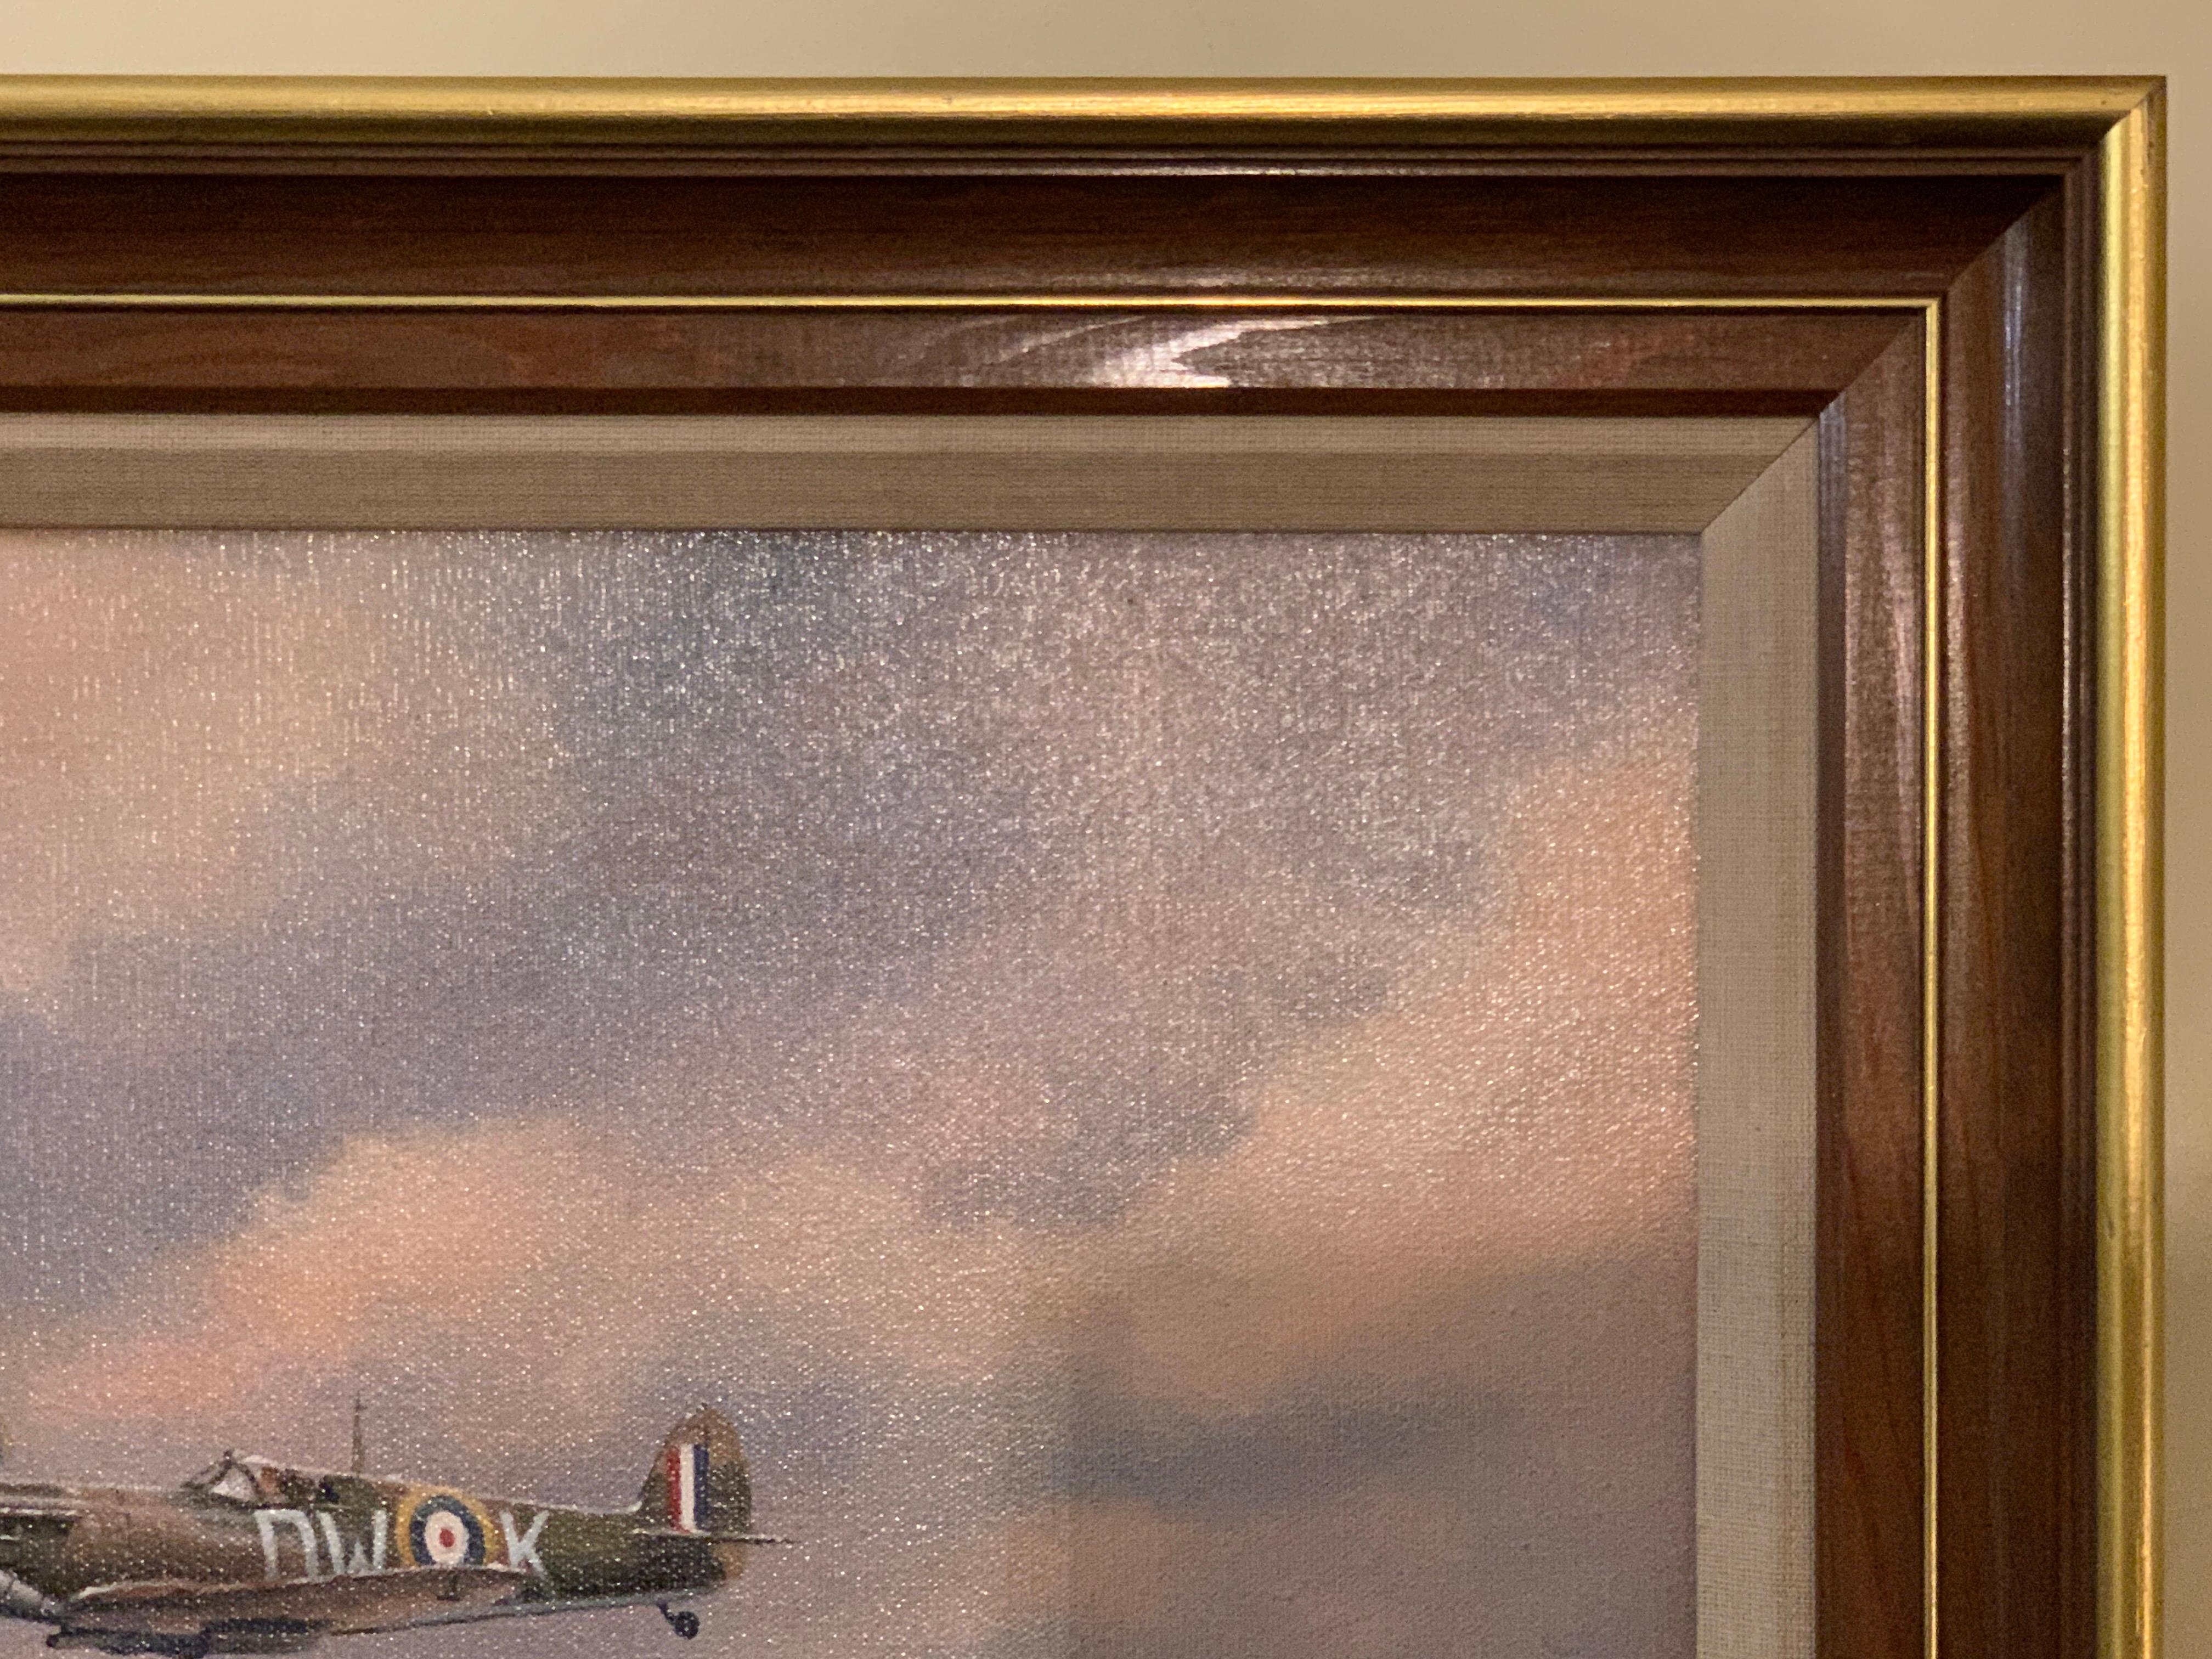 Two British Spitfires flying over the English landscape, 20th century  - Brown Figurative Painting by Roland Wong